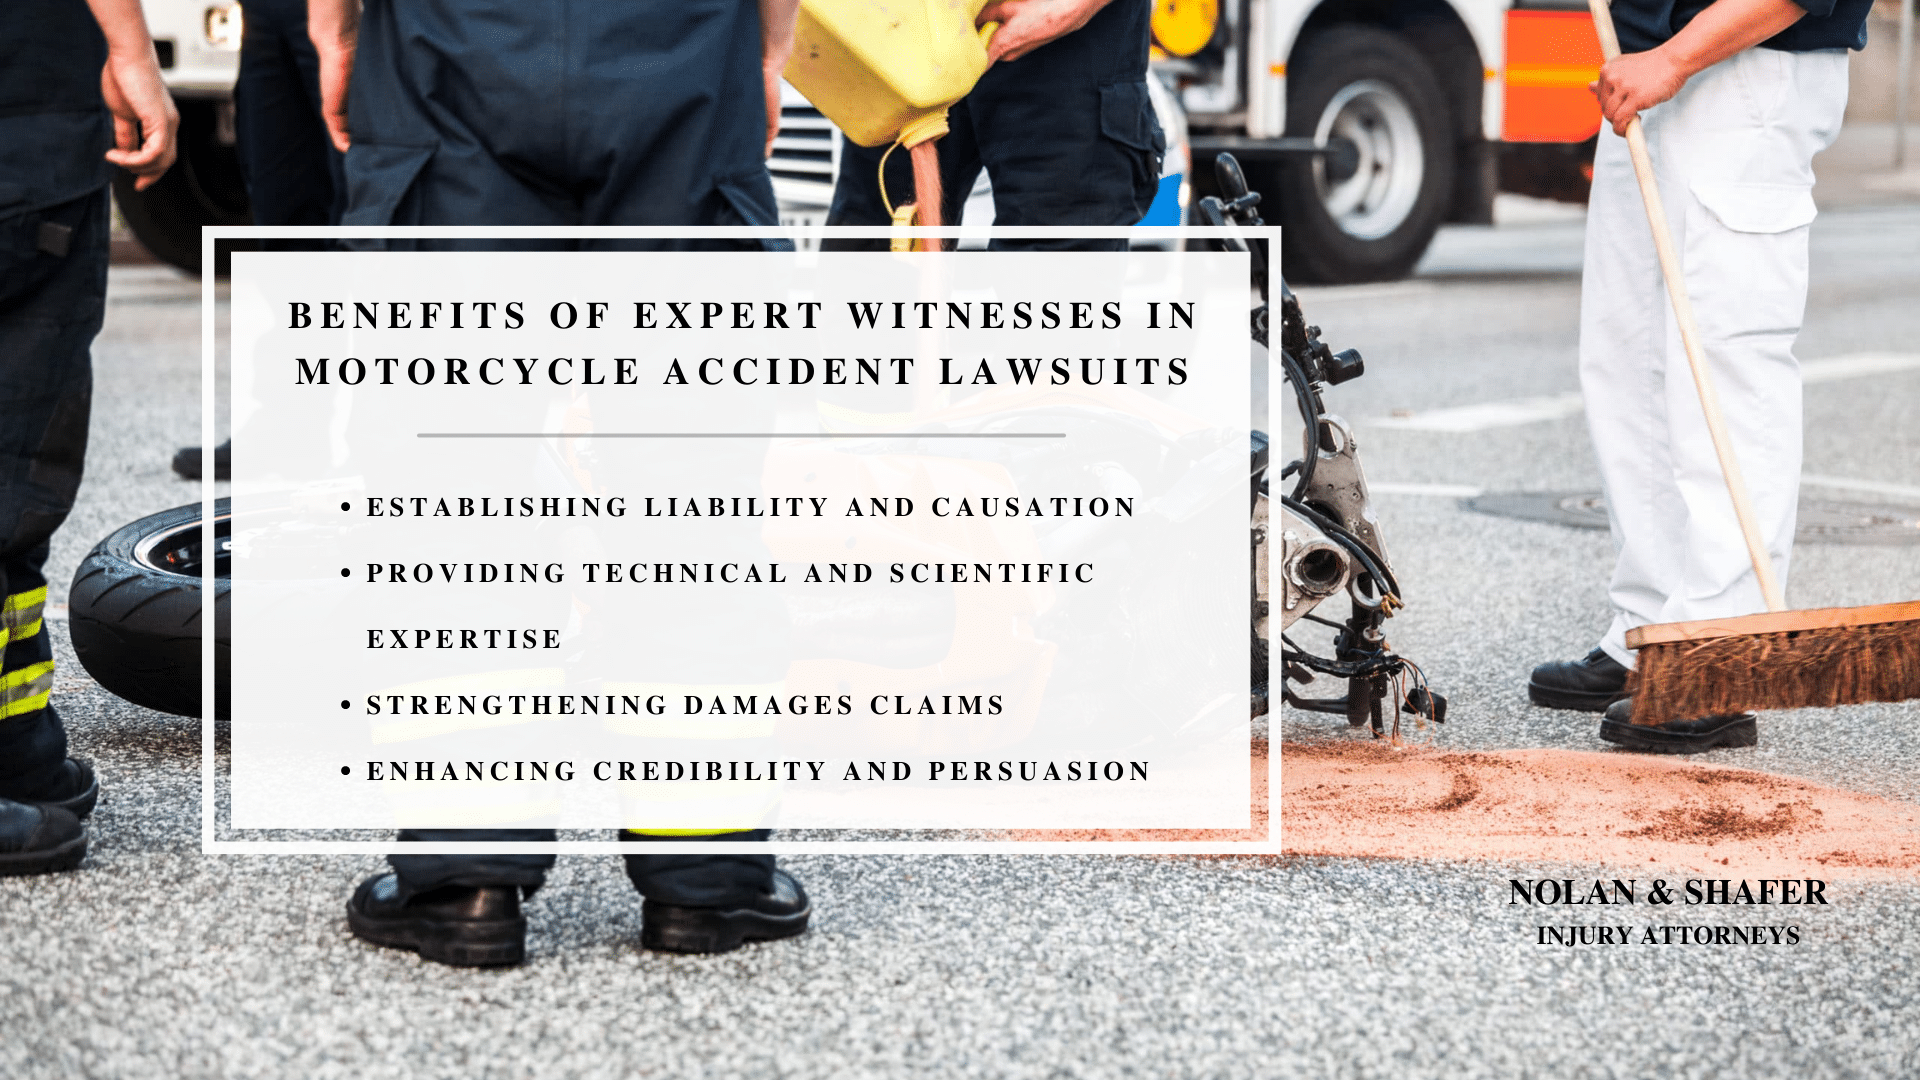 Infographic image of the benefits of expert witnesses in motorcycle accident lawsuits